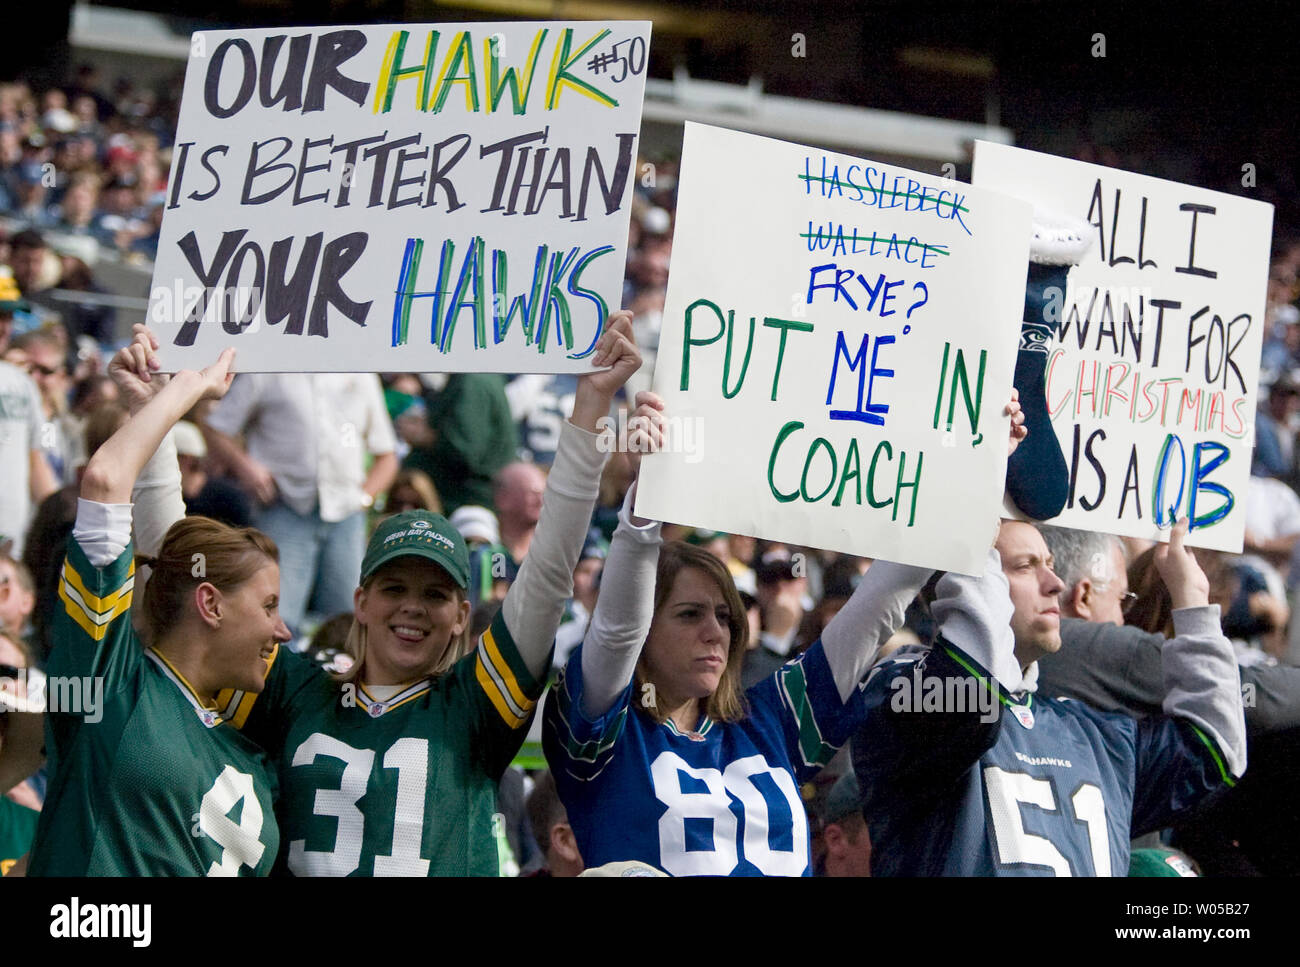 Green Bay Packers'  fans Alice Martin, left, and Bobby Nelms display their signs next to Seattle Seahawks' fans Marsha and Alan Martin as they holds up their signs in the first quarter at Qwest Field in Seattle on October 12, 2008. An injury to starter Matt Hasselbeck and a strained calf muscle to backup Seneca Wallace, opened the door for Charlie Frye, who made his first regular-season start as a Seattle Seahawks today. Frye completed 12 of 23 passes for  83 yards and two touchdowns and two interceptions in the Seahawks 17-27 loss to the Packers. (UPI Photo/Jim Bryant) Stock Photo